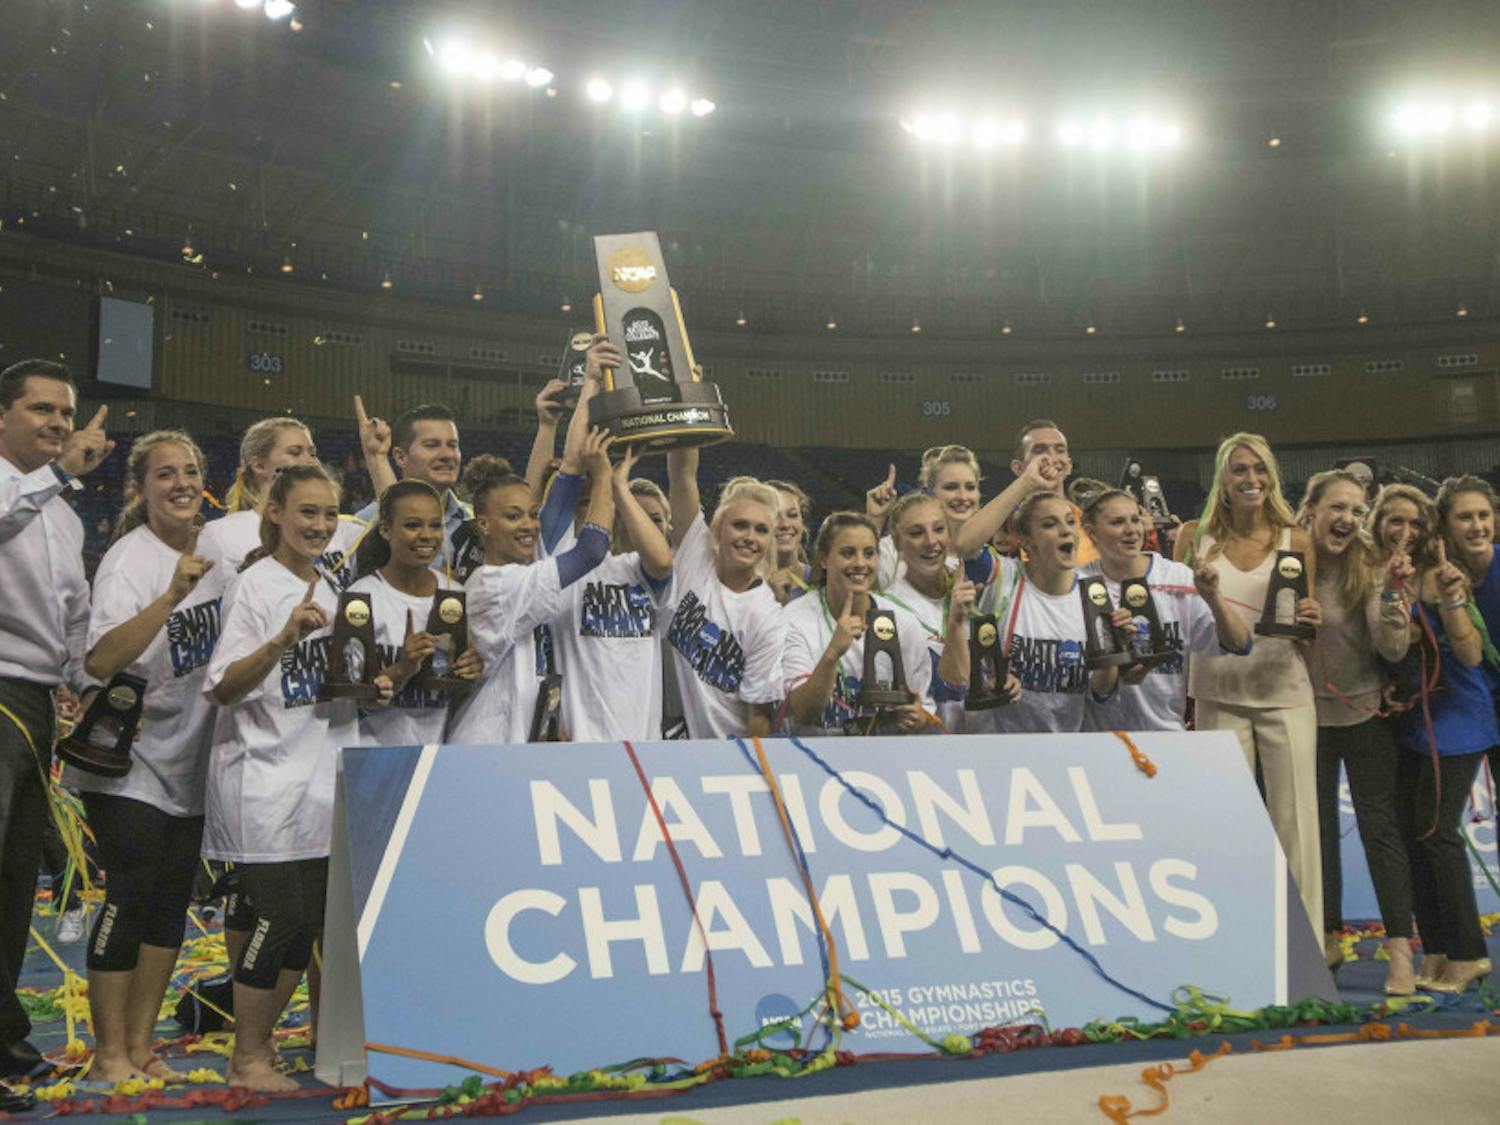 The Florida gymnastics team celebrates wining the NCAA National Championship on Saturday, April 18, 2015 in Fort Worth, Texas.